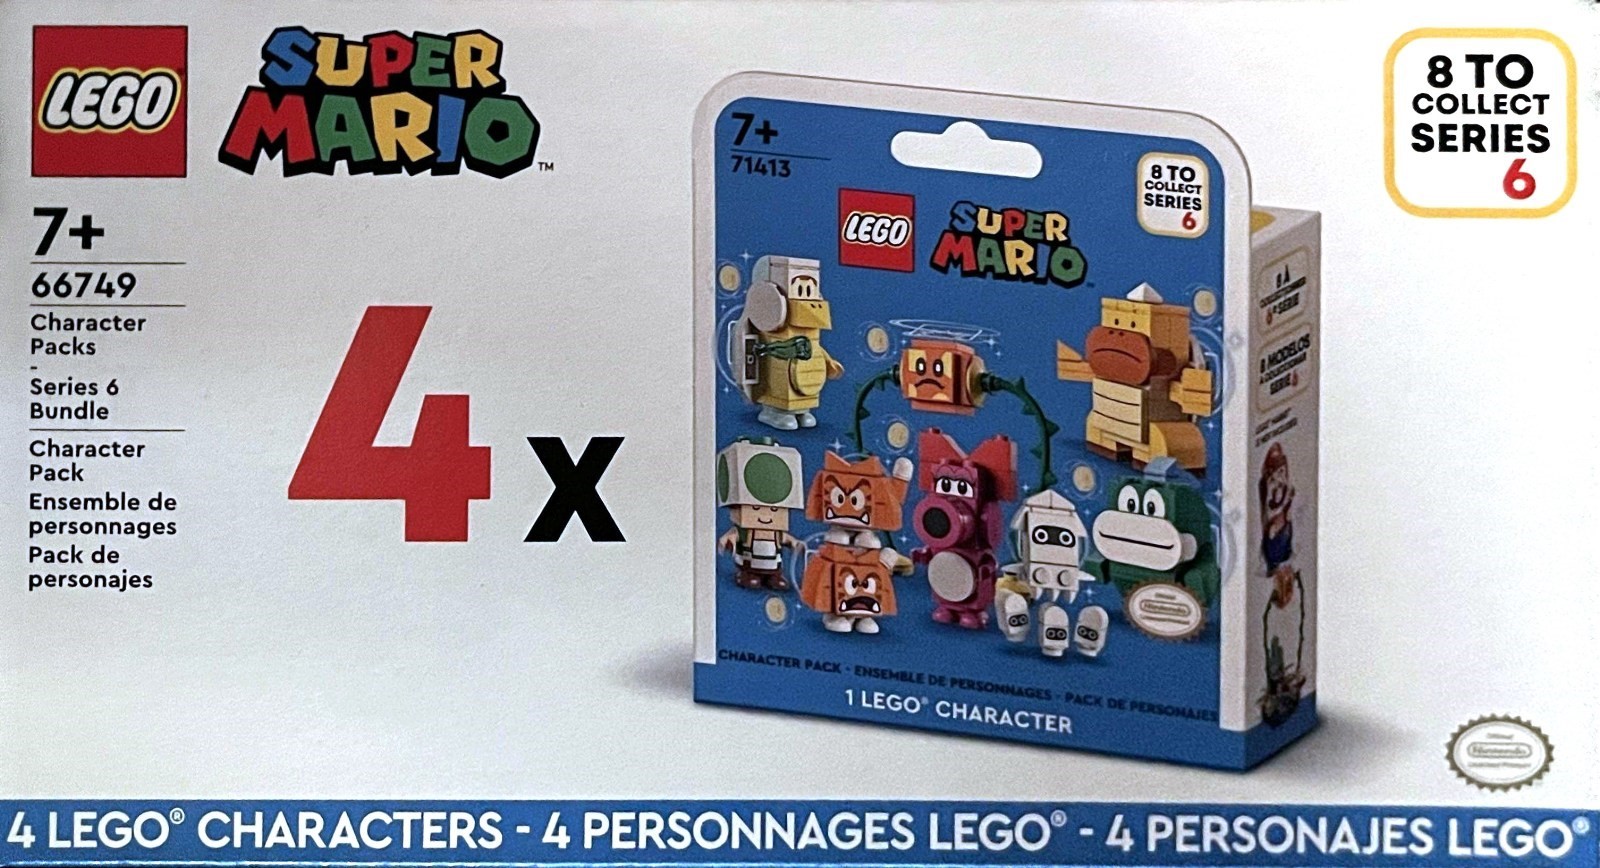 I created a LEGO Mario character pack series 7 set, with friends